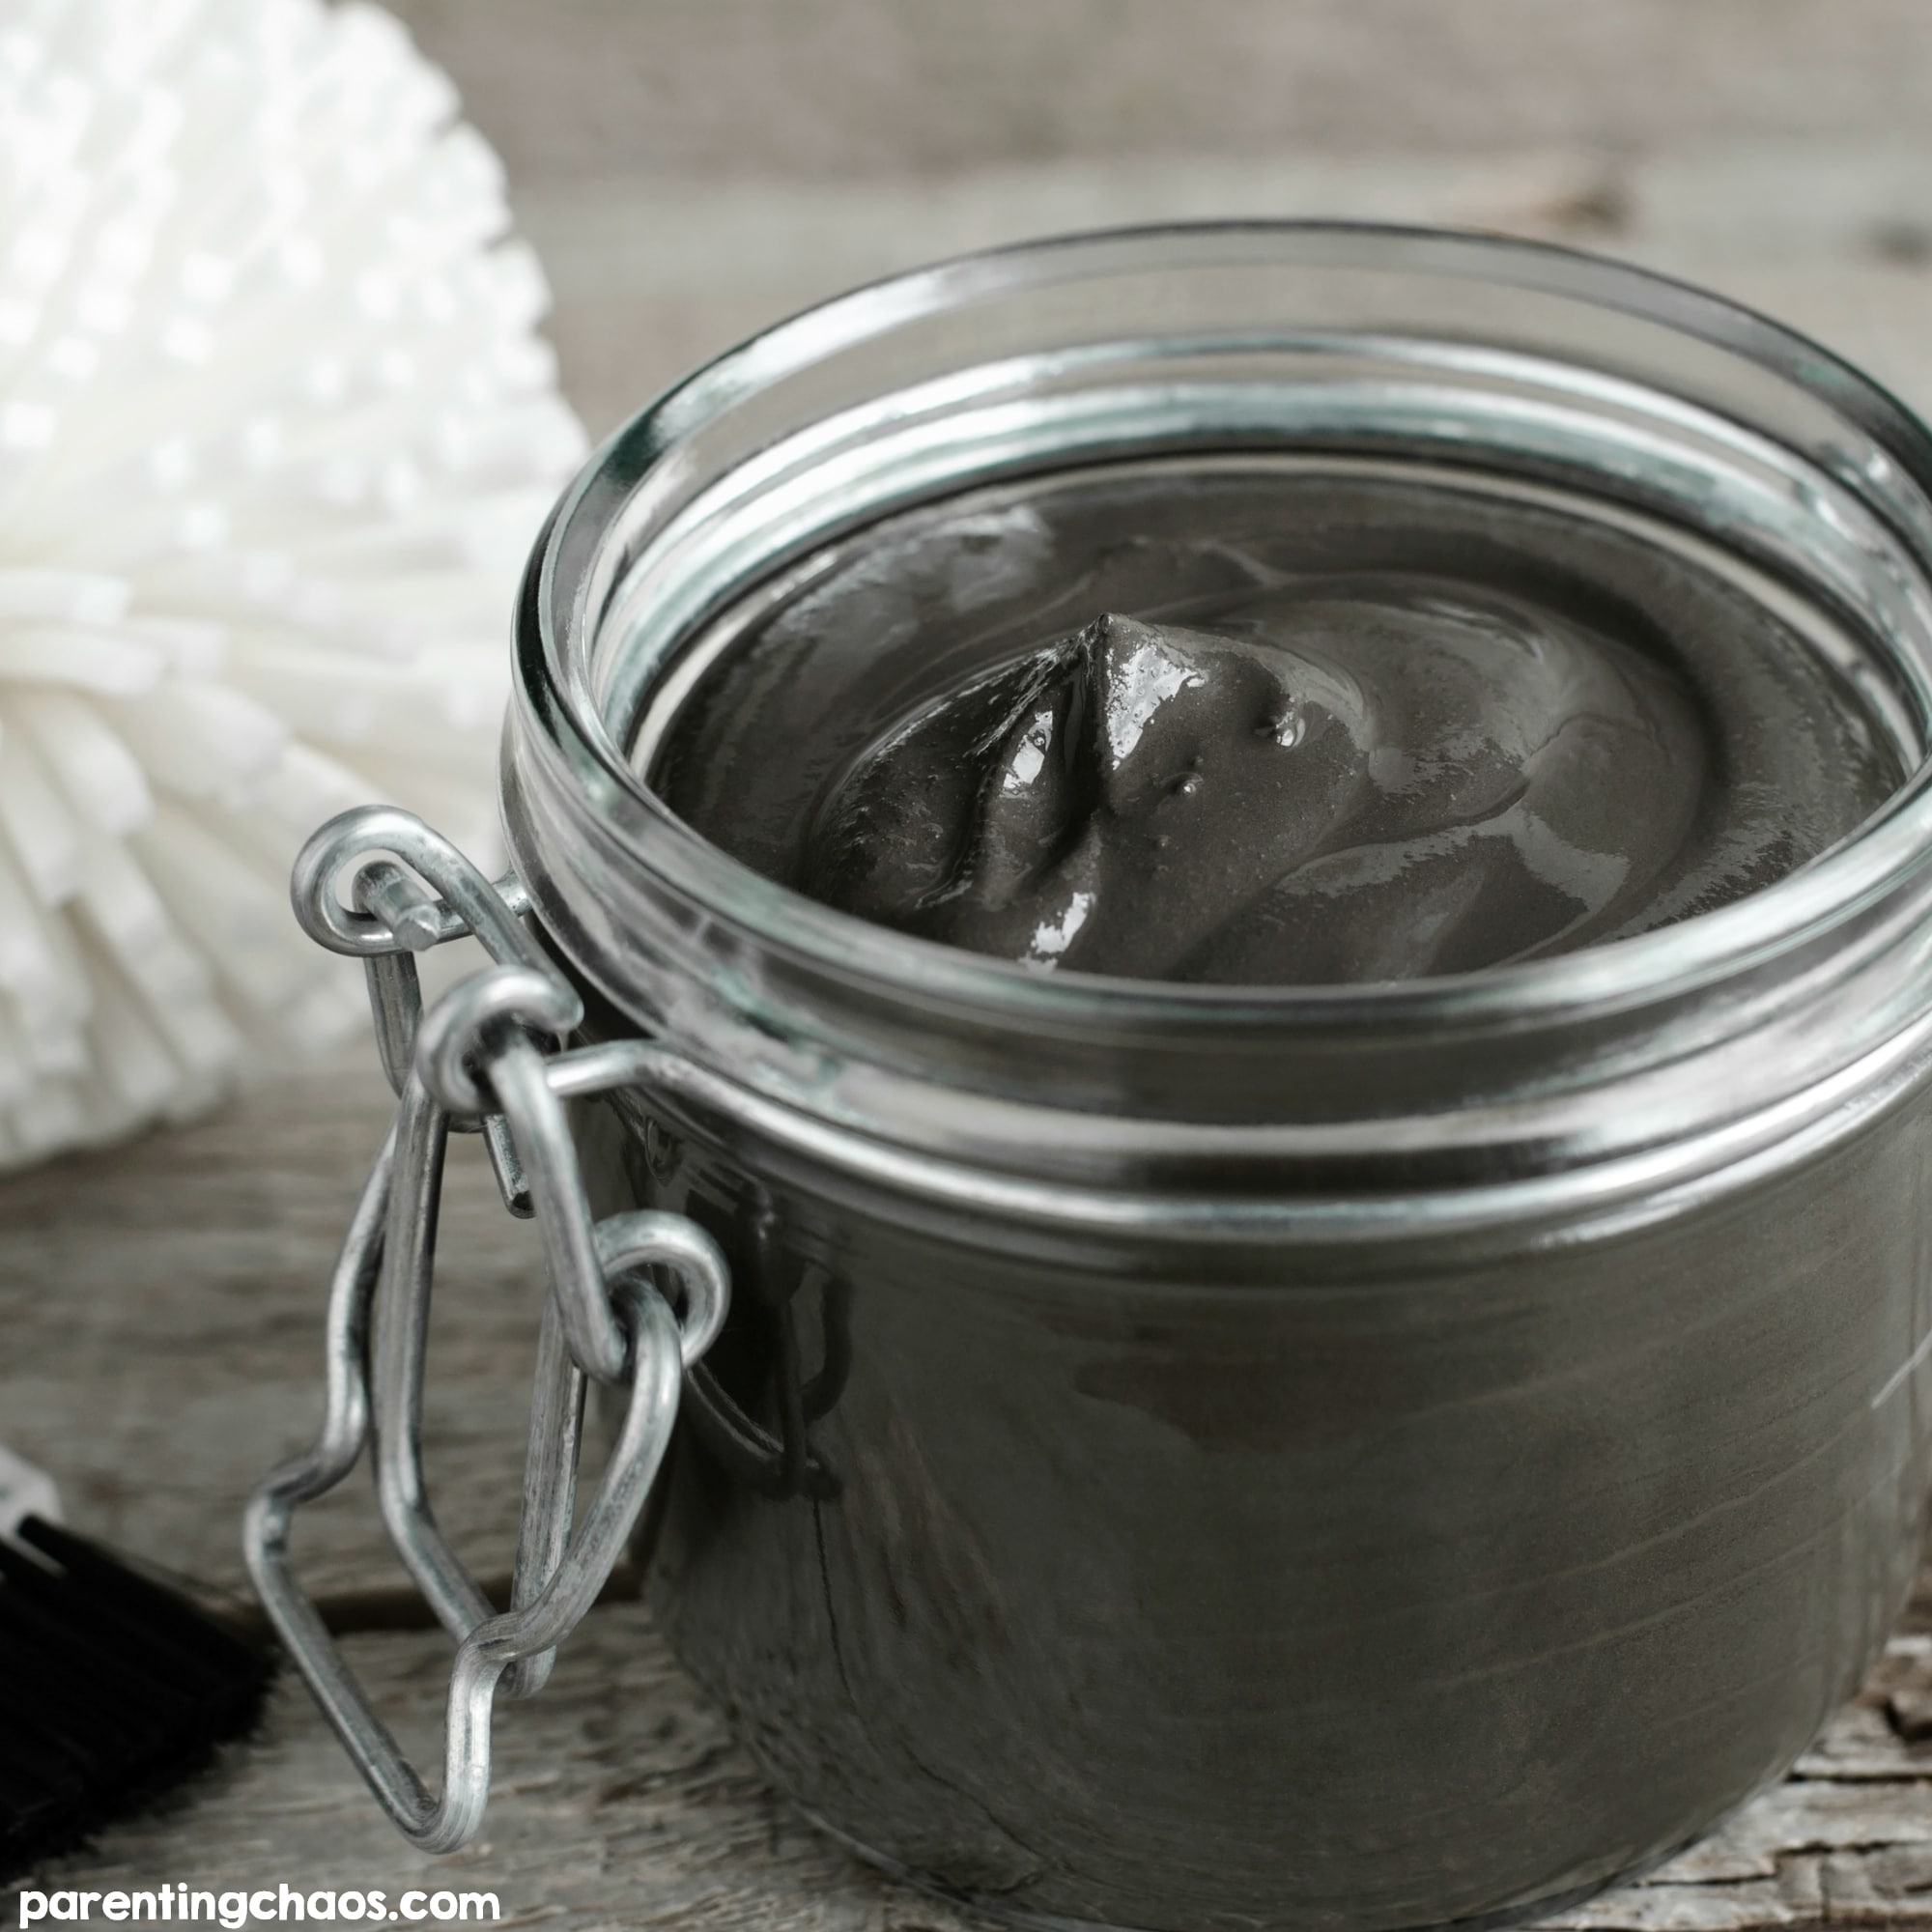 DIY Activated Charcoal Face Mask